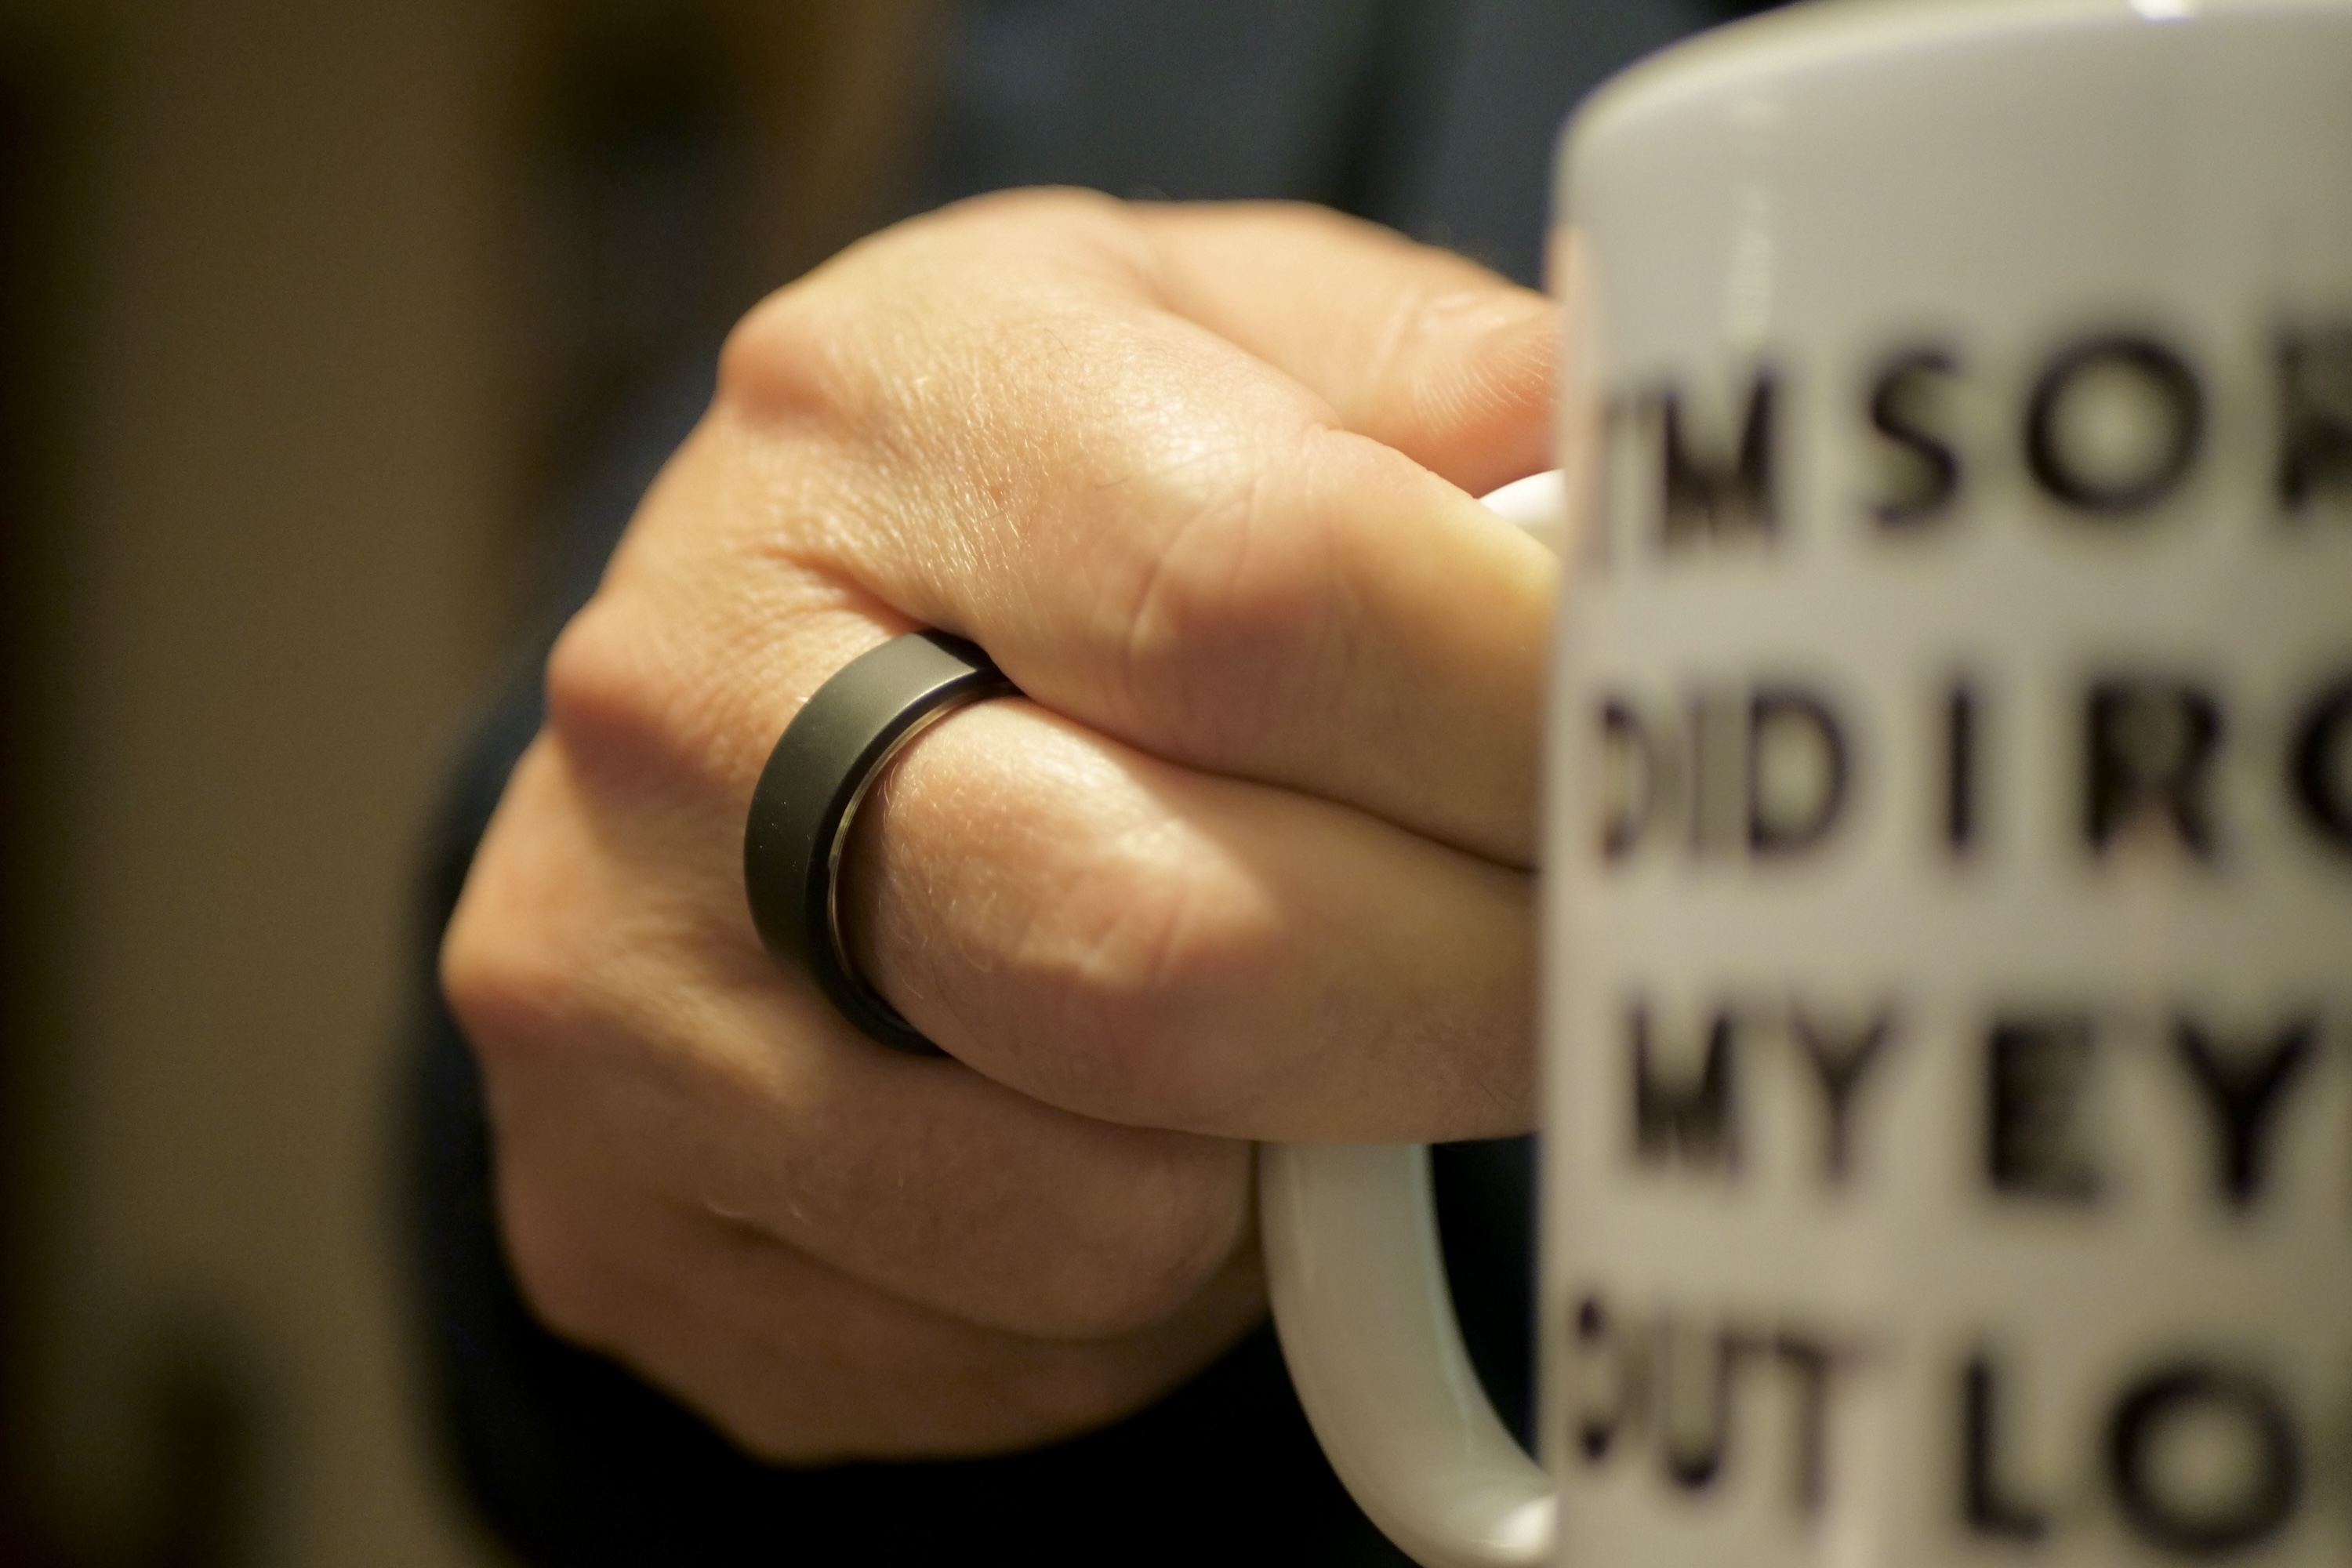 I made my friend wear a smart ring. What happened was fascinating